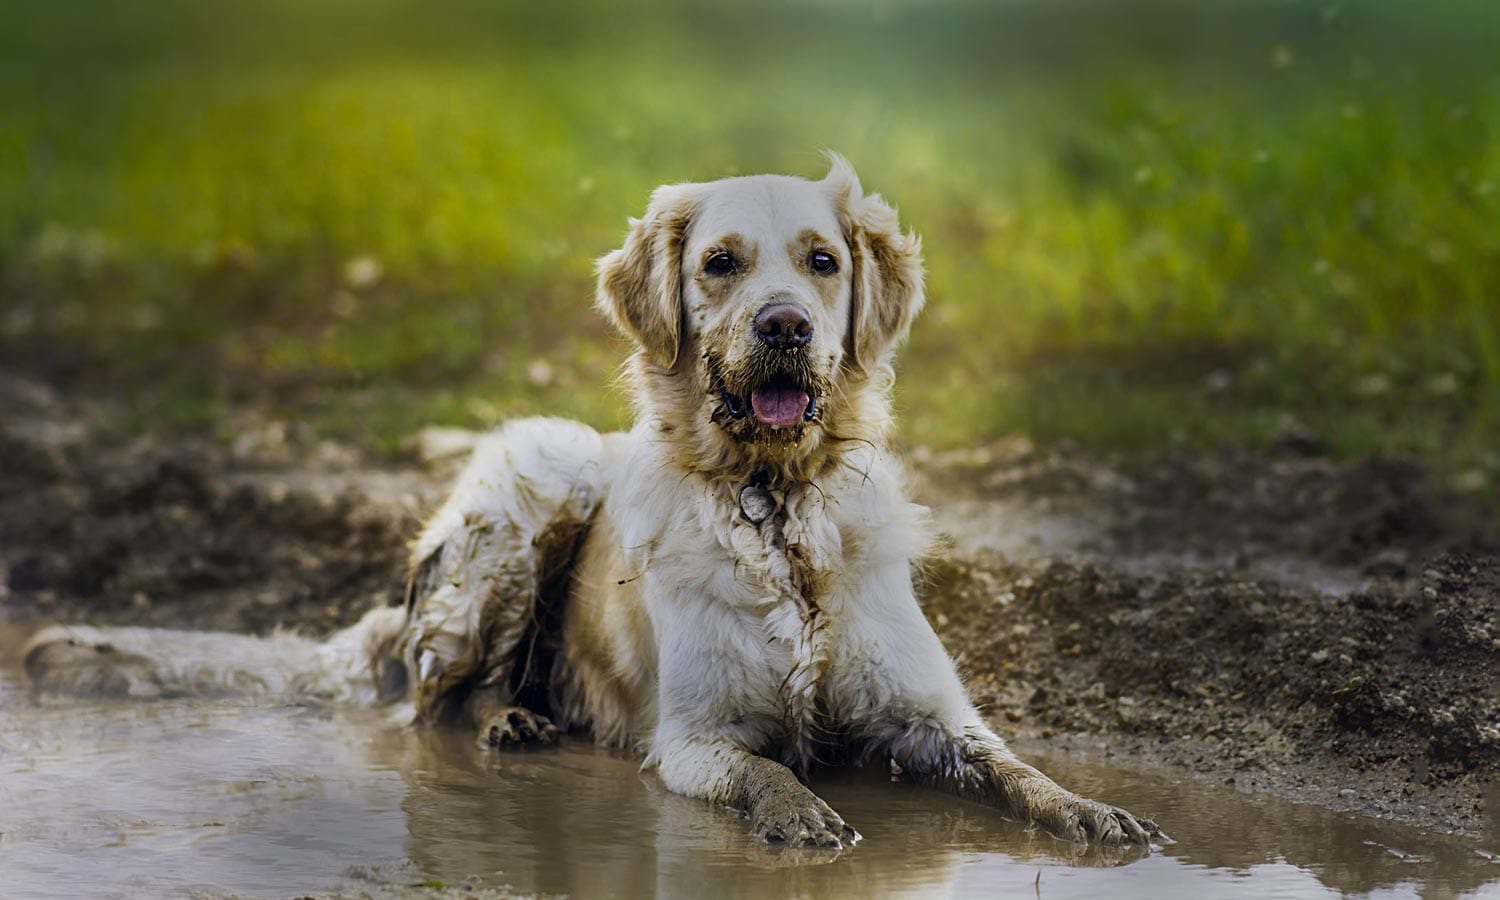 Dog laying in a mud puddle